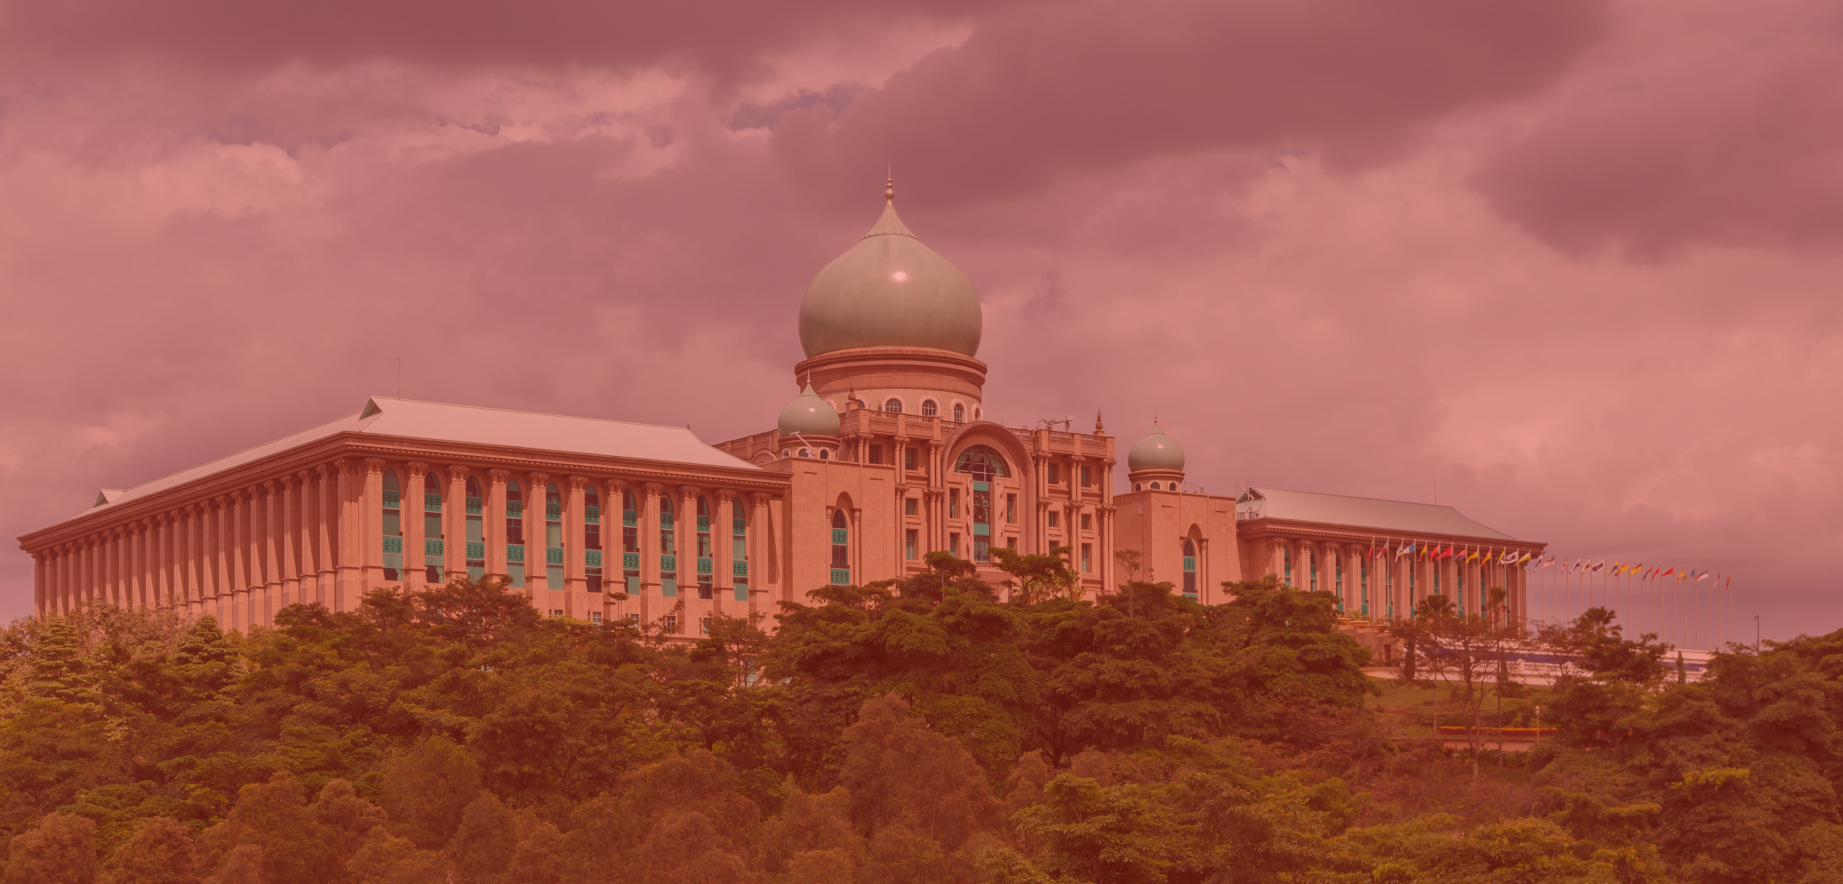 Meredith L. Weiss – The Limits of “Populism”: How Malaysia Misses the Mark and Why That Matters